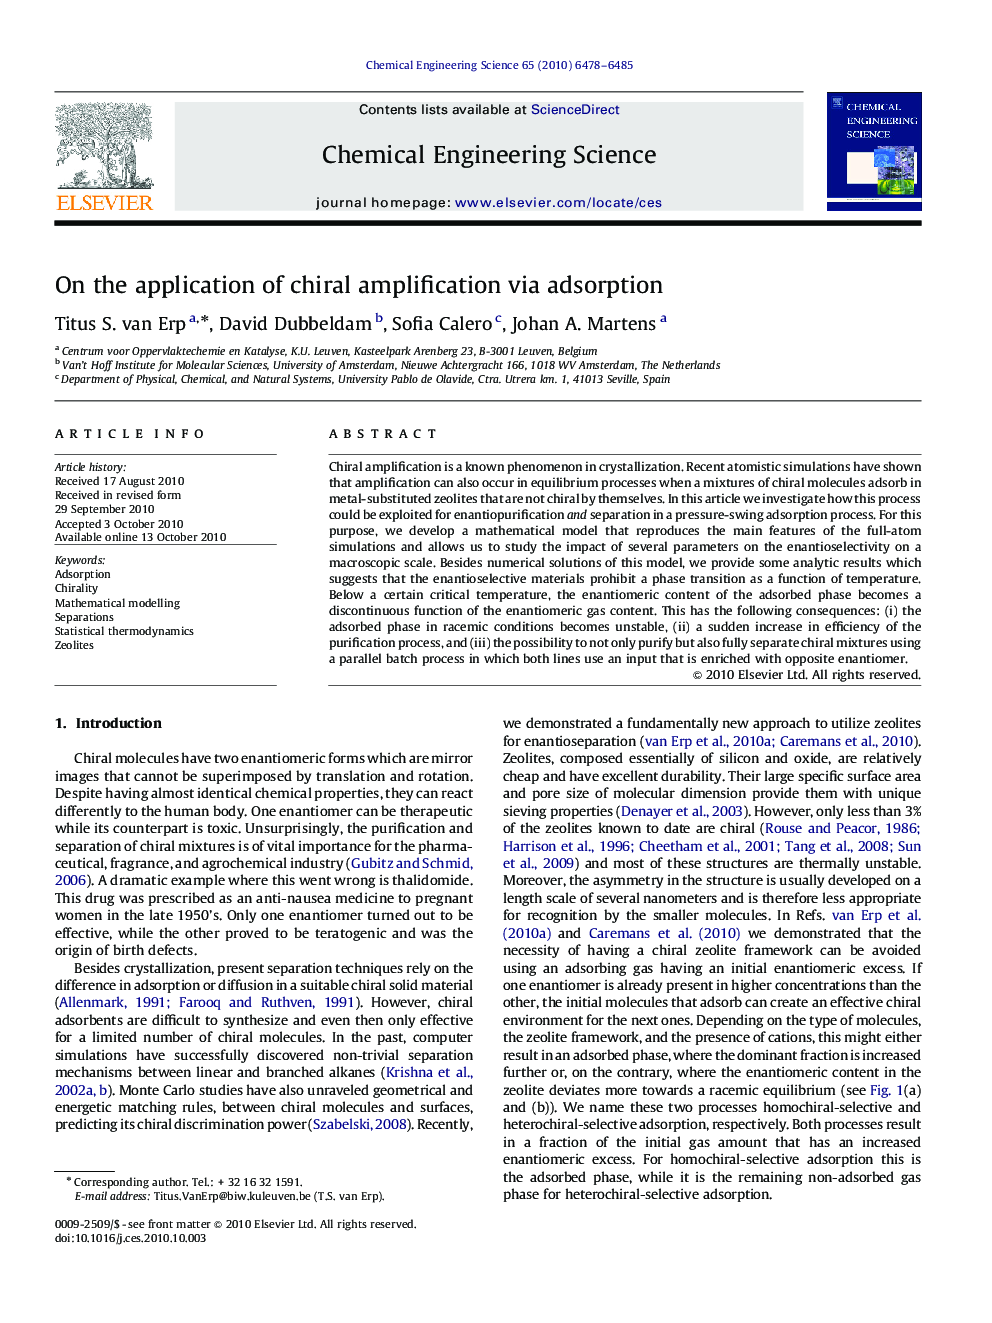 On the application of chiral amplification via adsorption